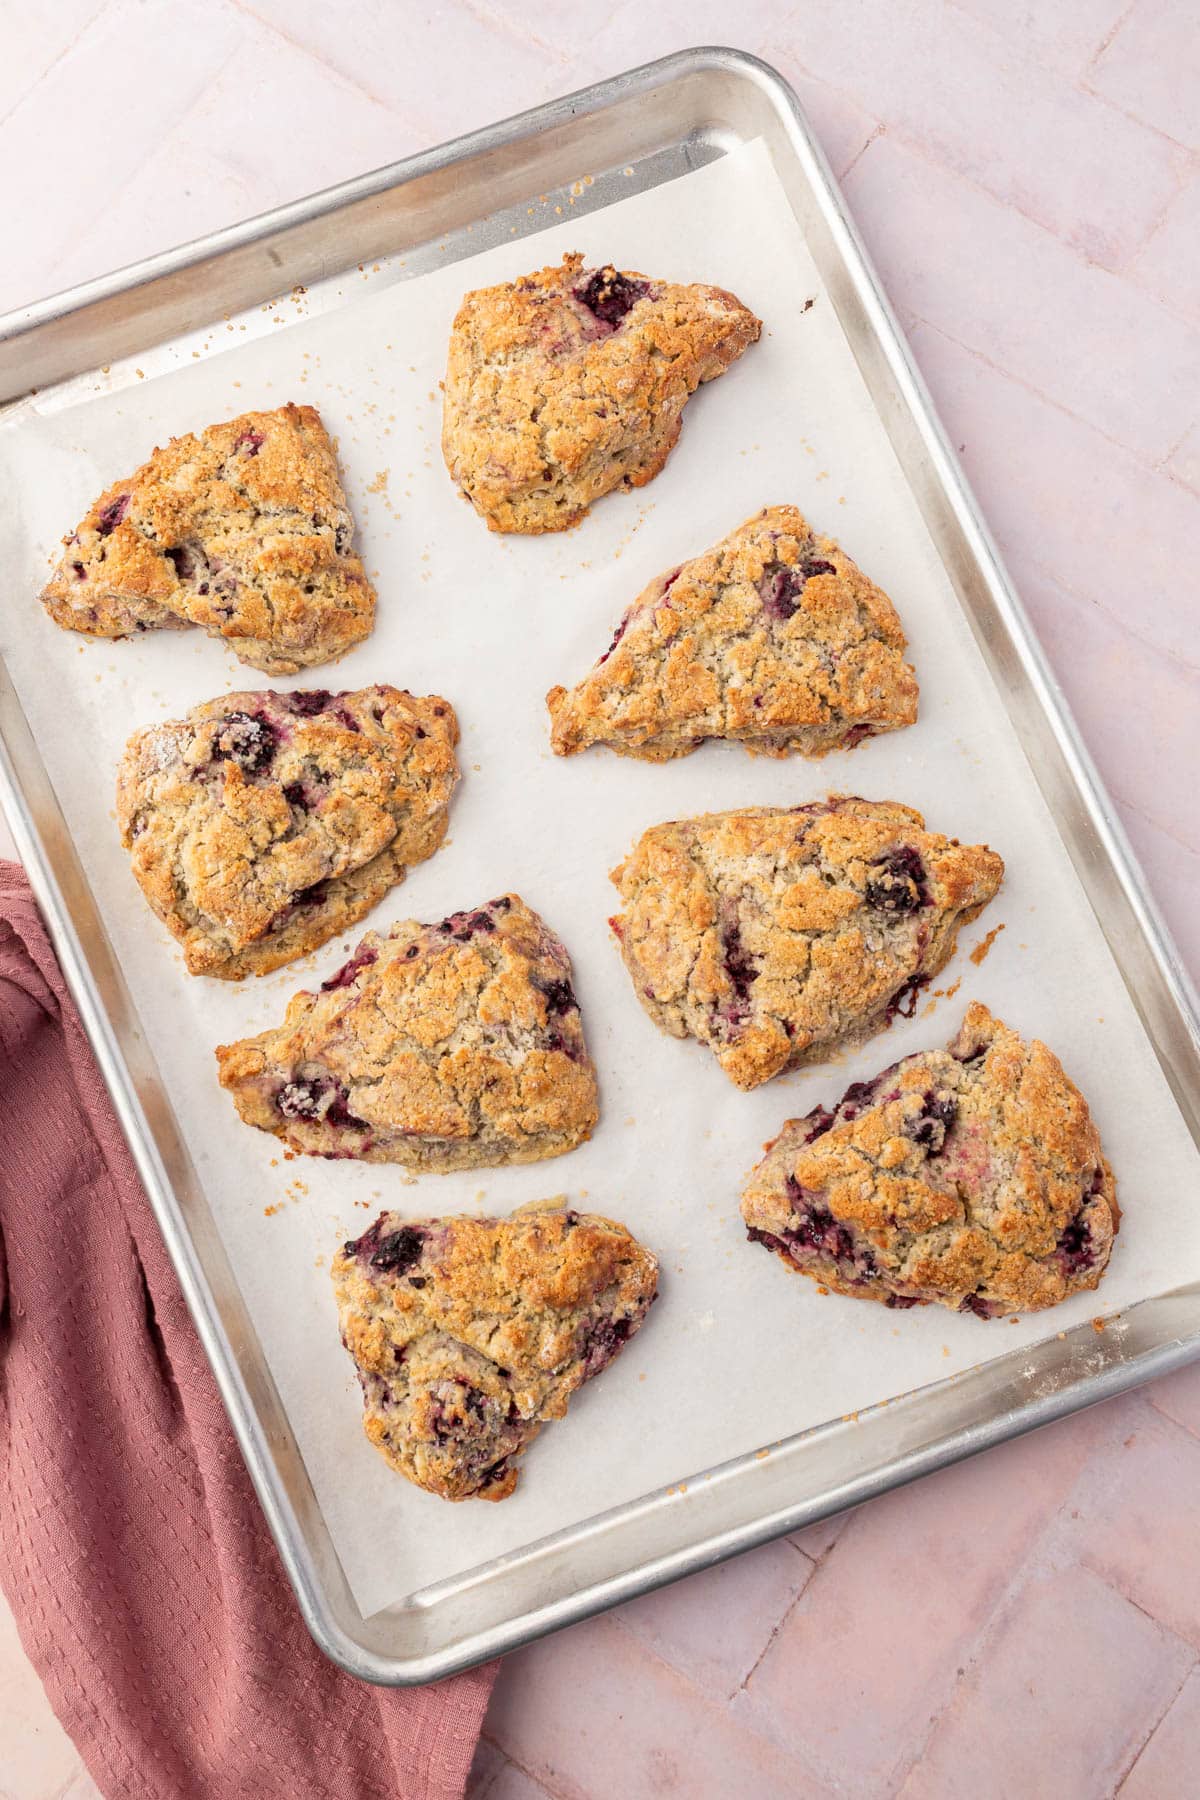 An overhead view of gf blackberry scones on a baking sheet lined with parchment paper.